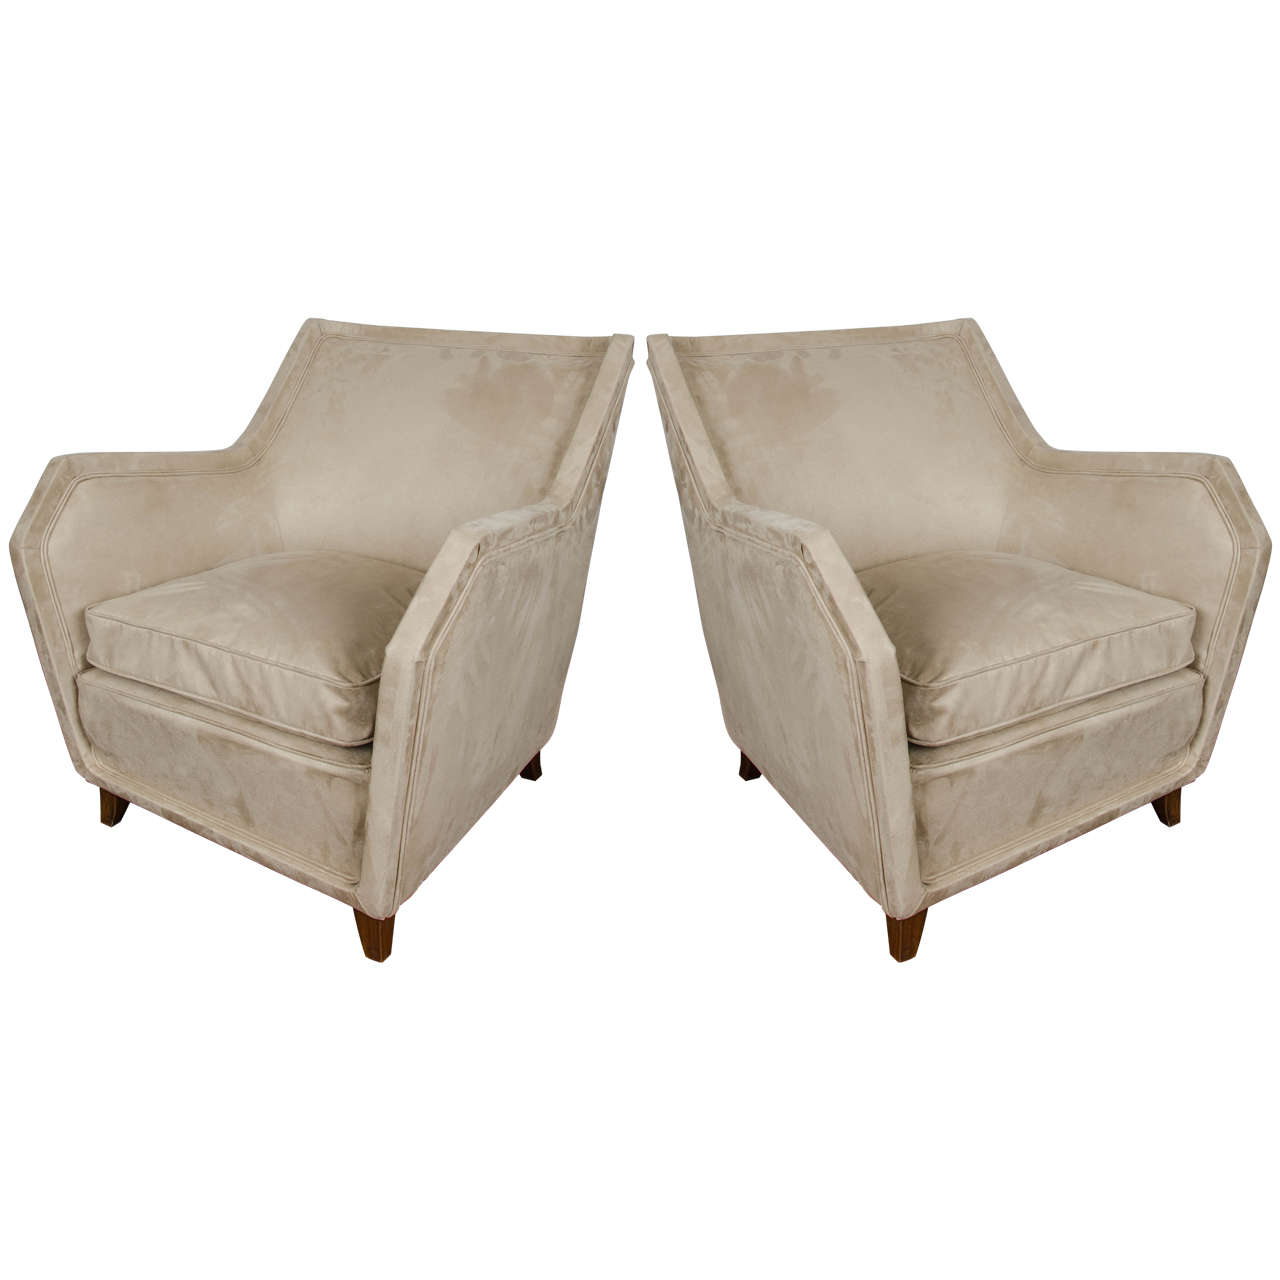 1935-1940 Pair of Italian Armchairs in Fake Suede